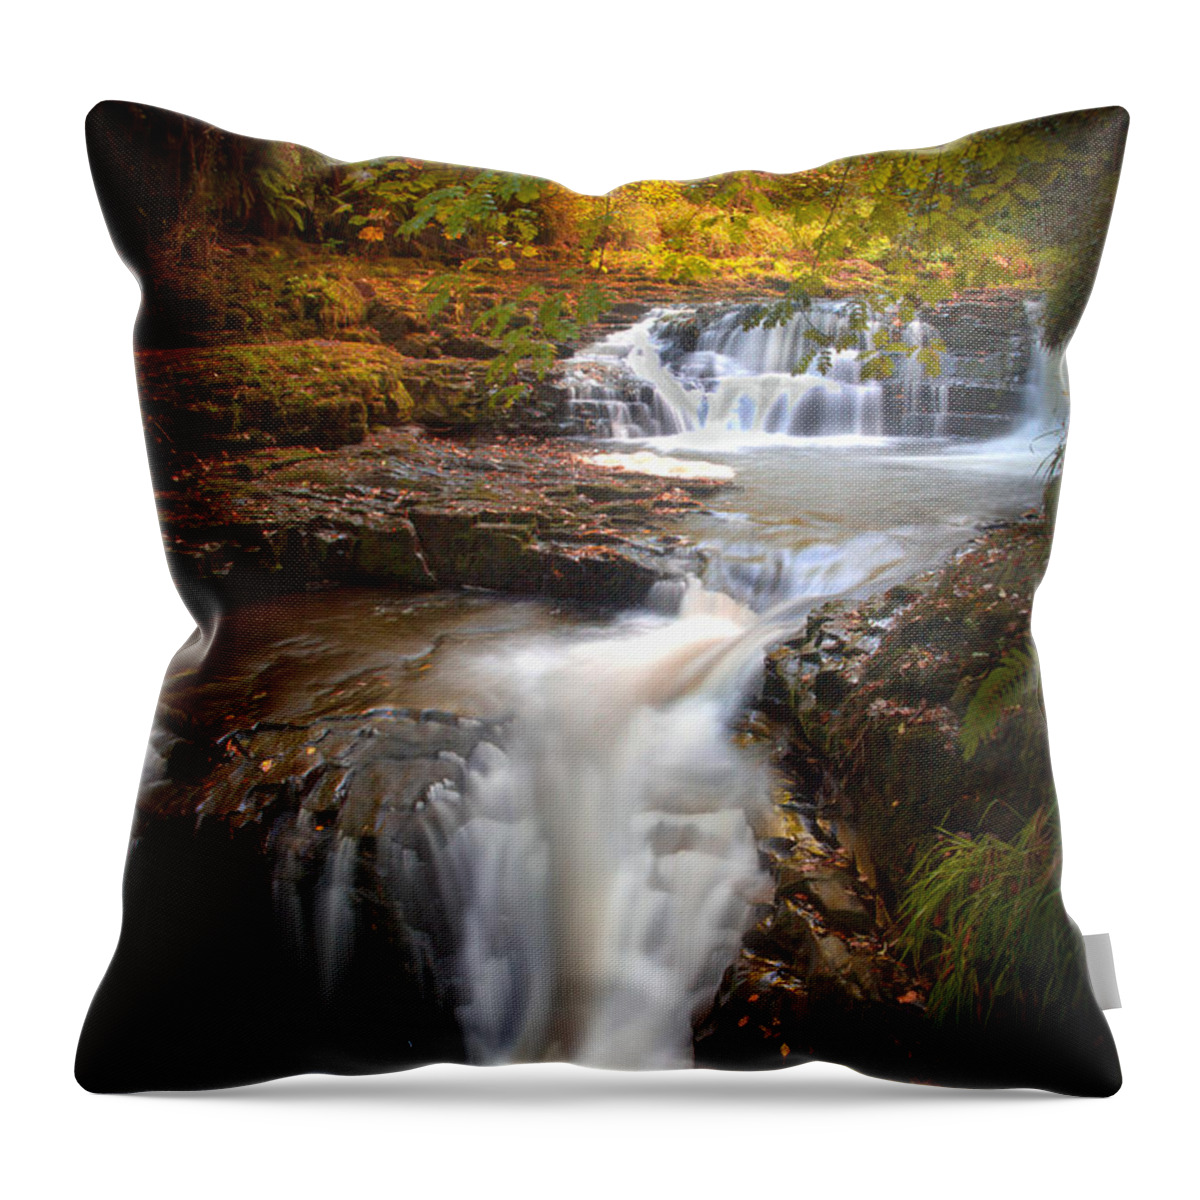 Clare Glens Throw Pillow featuring the photograph Clare Glens Fall Waterfall by Mark Callanan